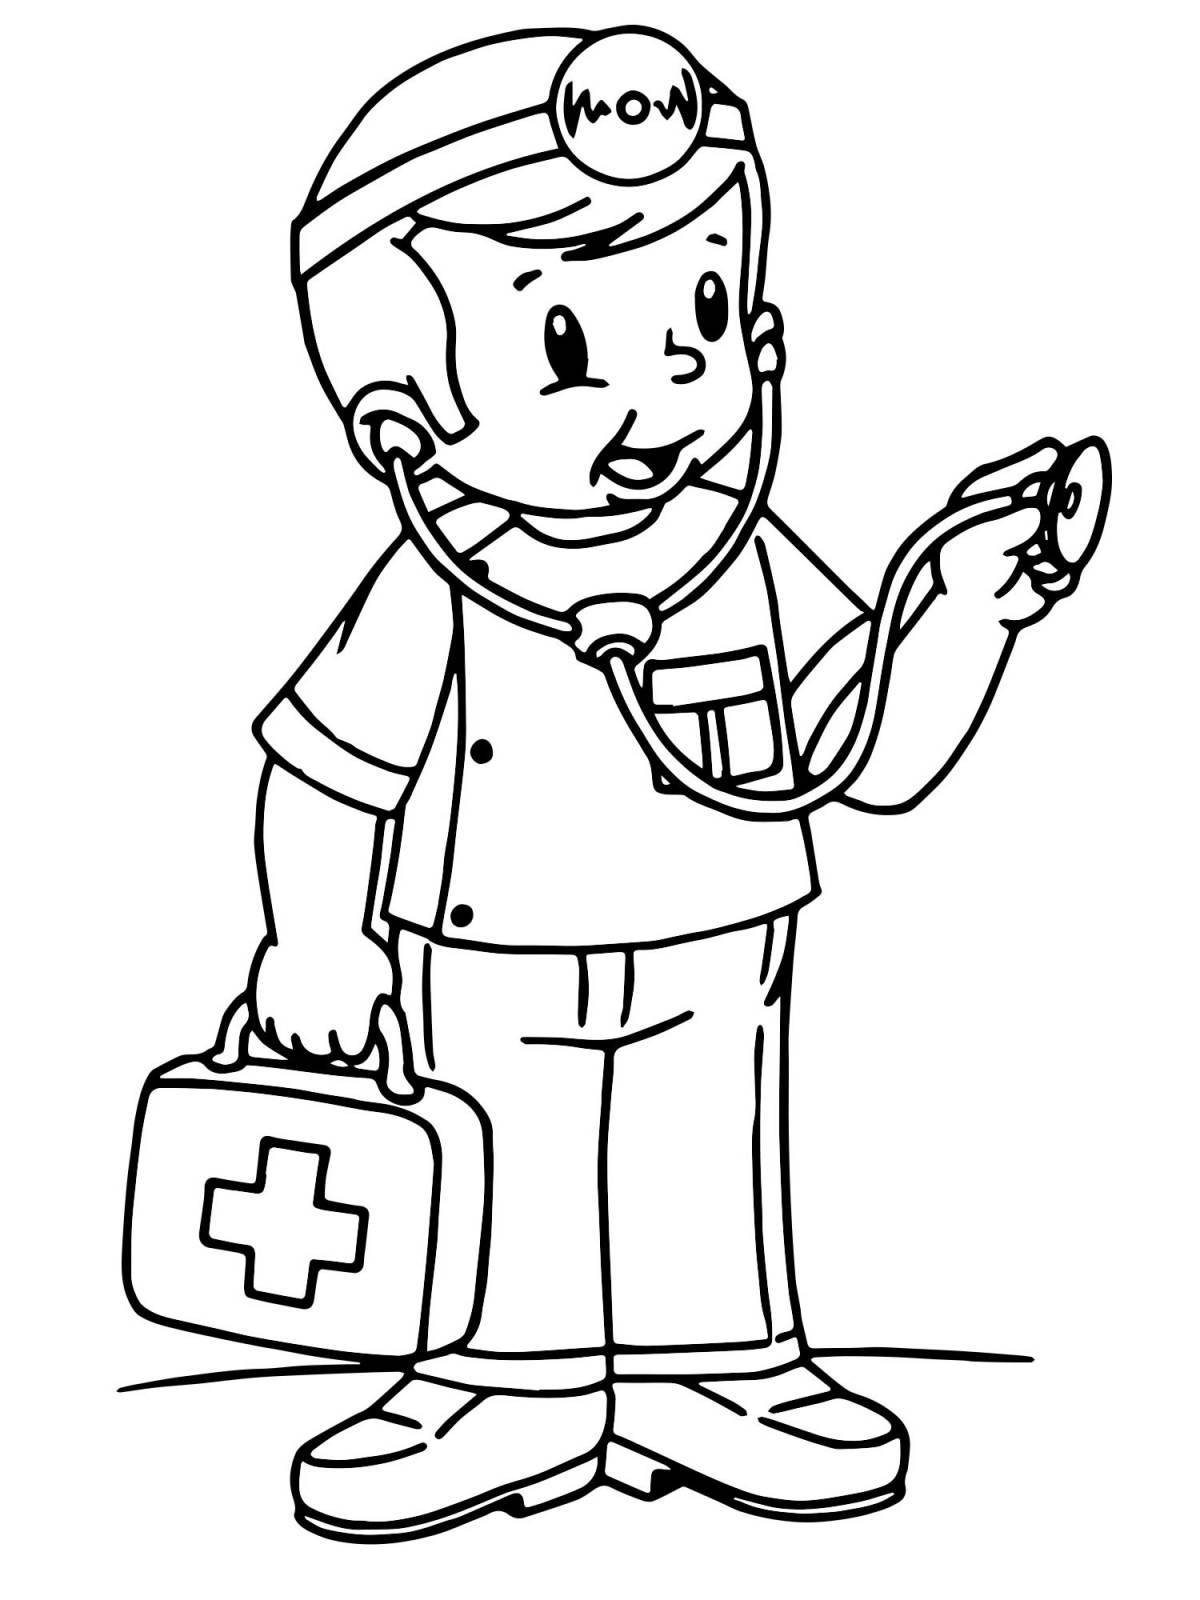 Coloring book playful doctor profession